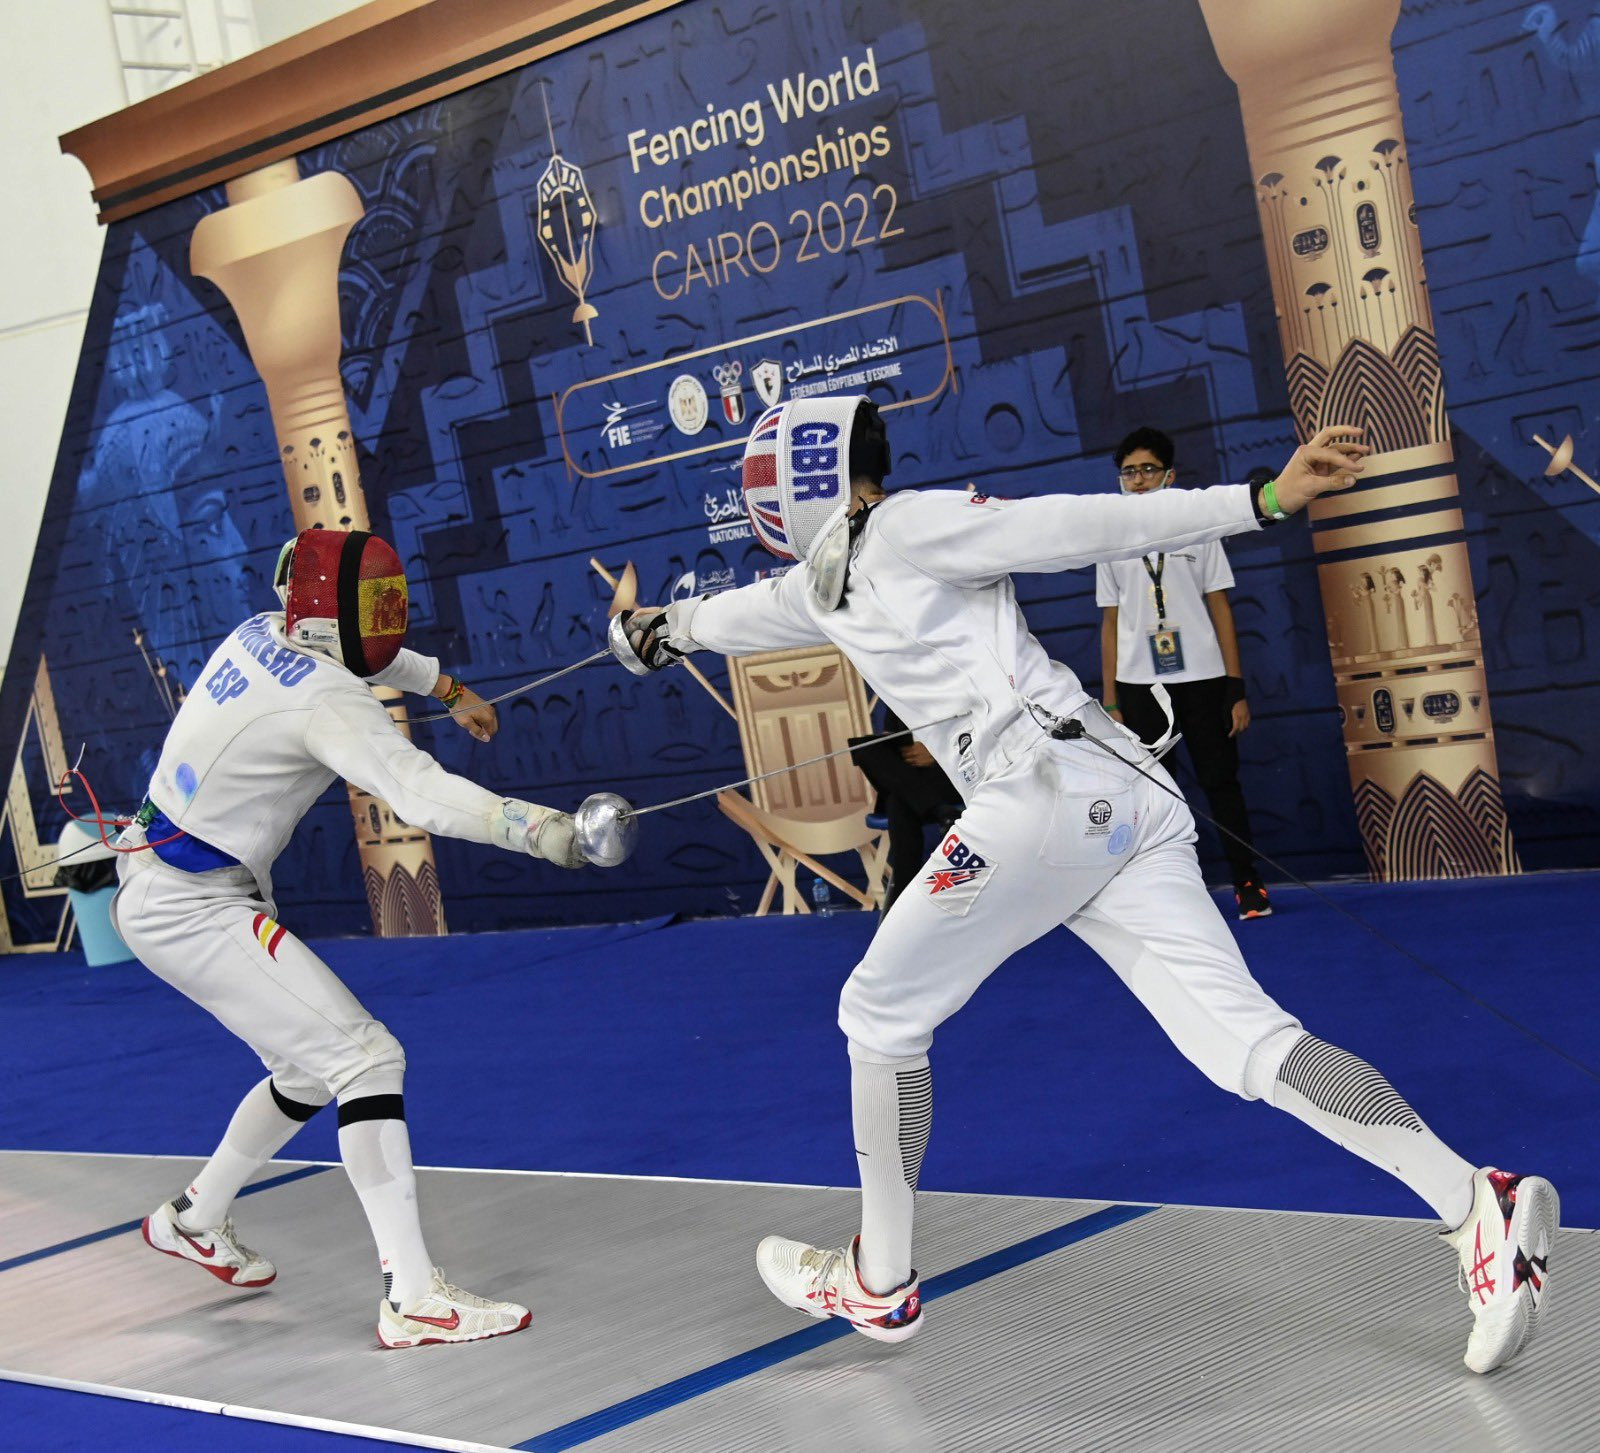 The qualifying rounds for the Fencing World Championships in Cairo has concluded before the main draws tomorrow ©FIE